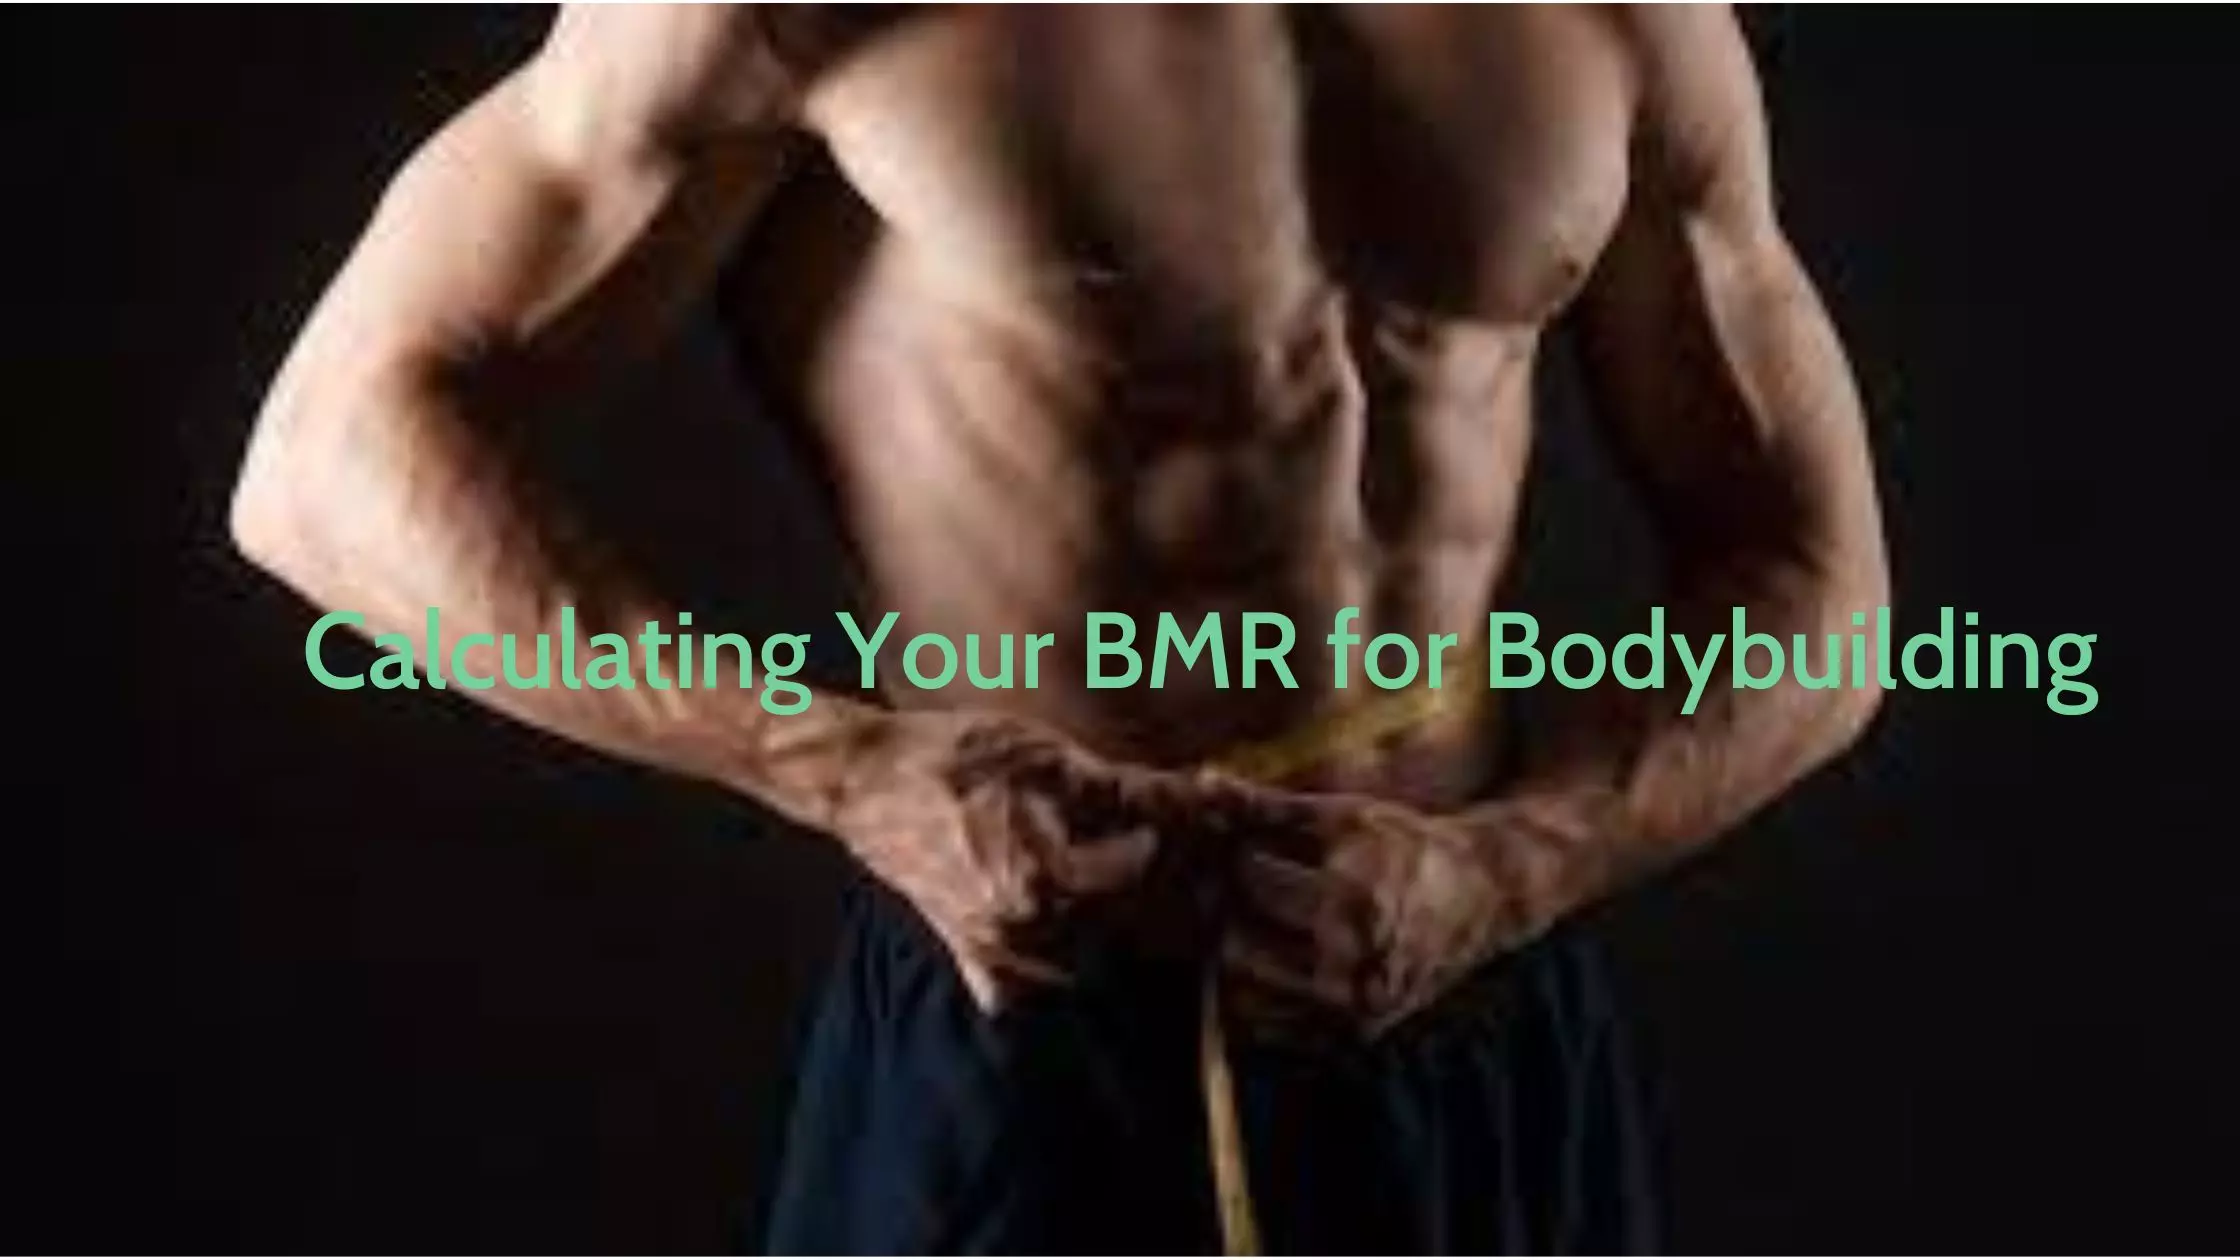 Calculating Your BMR for Bodybuilding